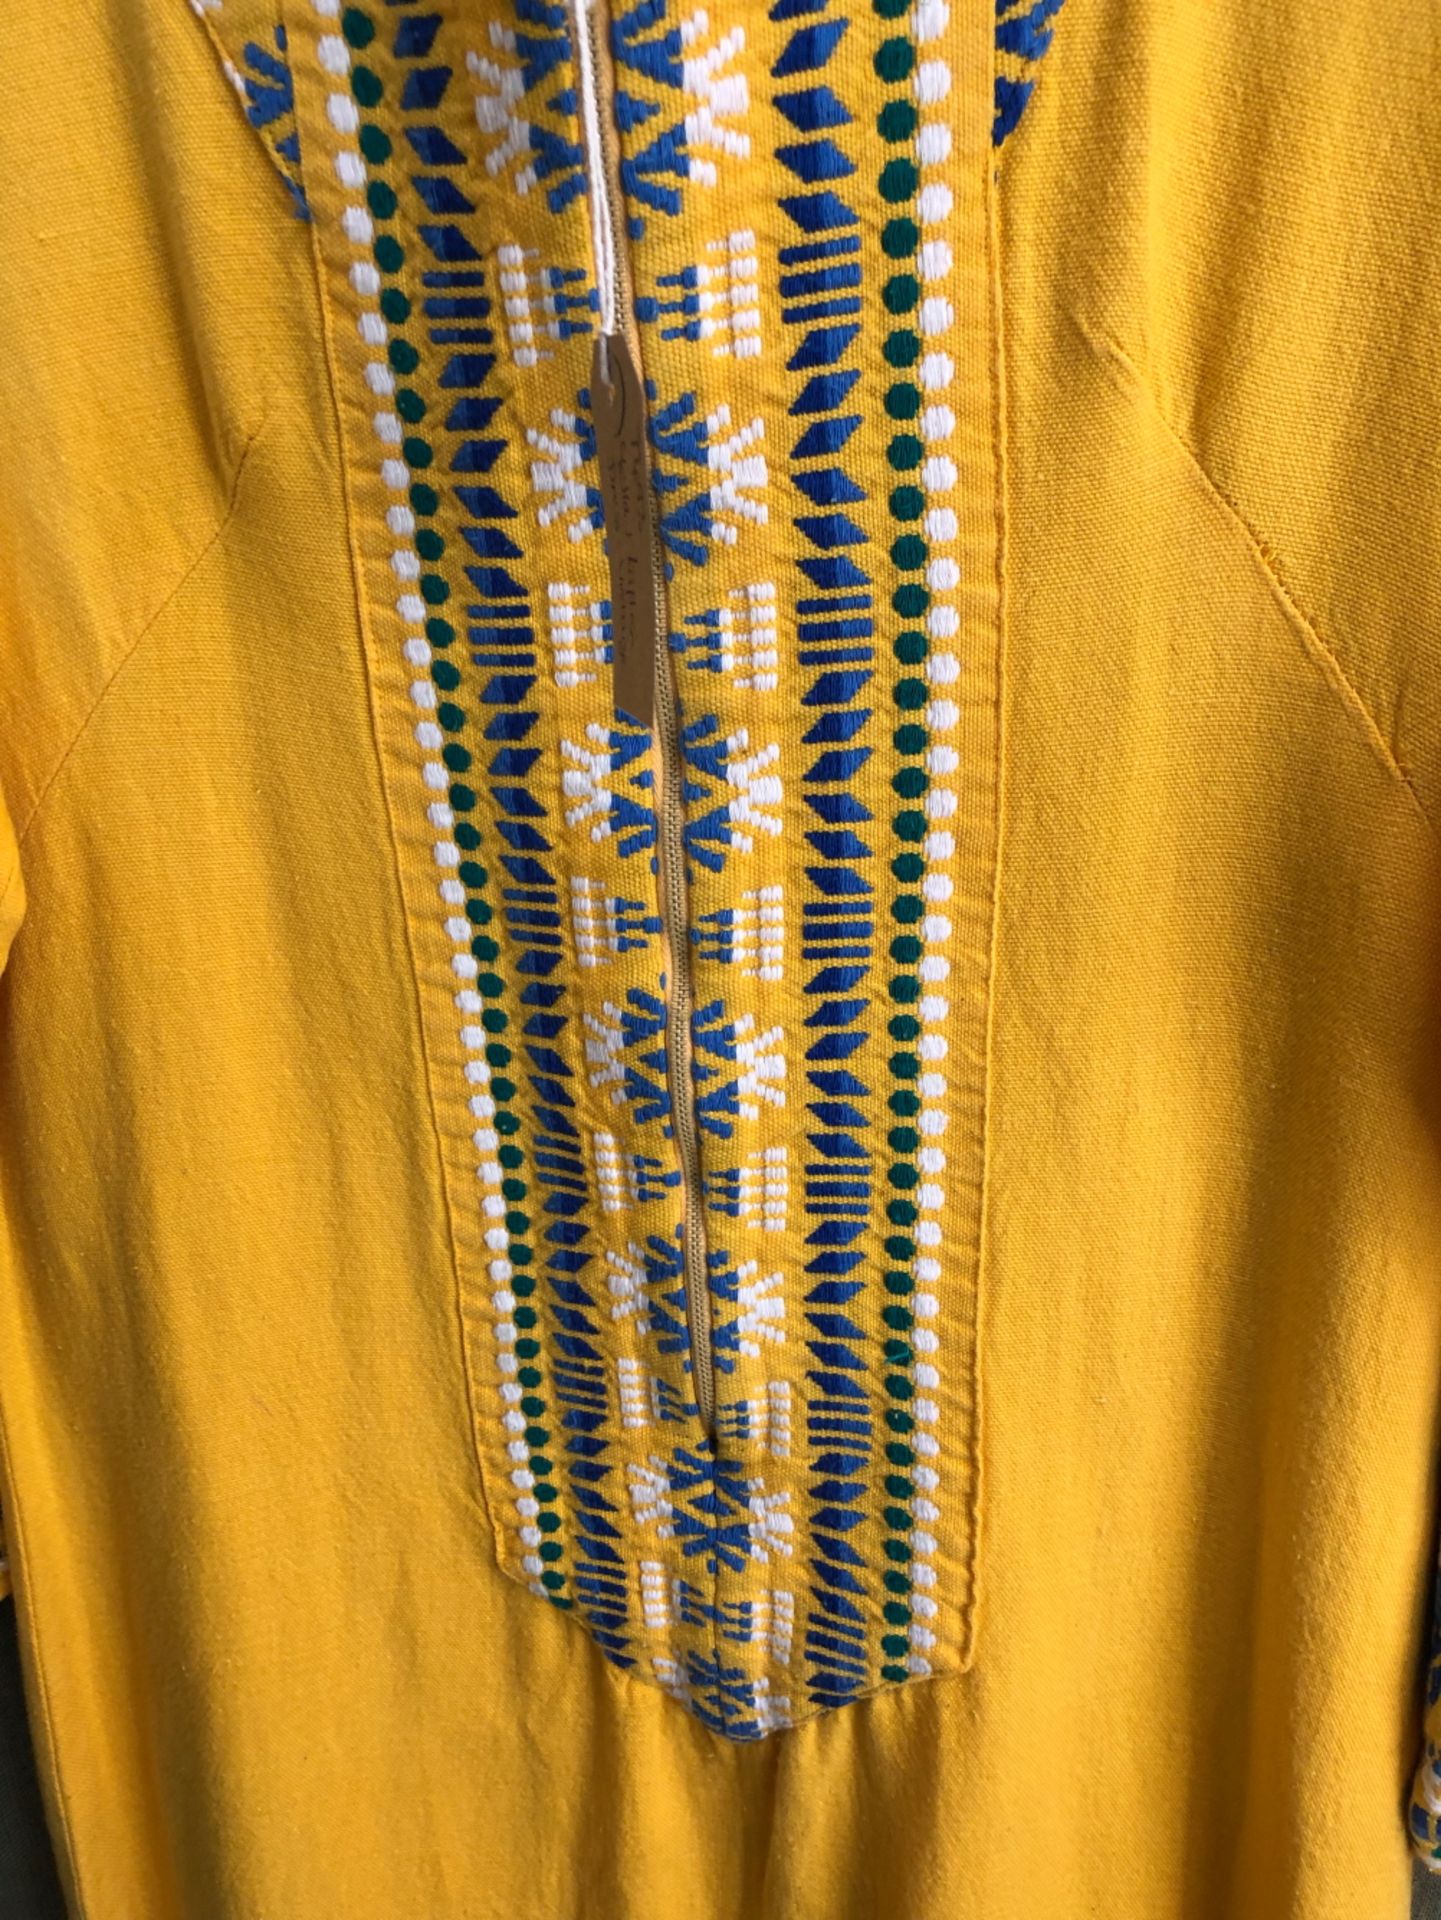 KAFTAN: A YELLOW GROUND KAFTAN DRESS TRIMMED WITH BLUE, GREEN AND WHITE GEOMETRIC BANDS, SLEEVE - Image 2 of 5